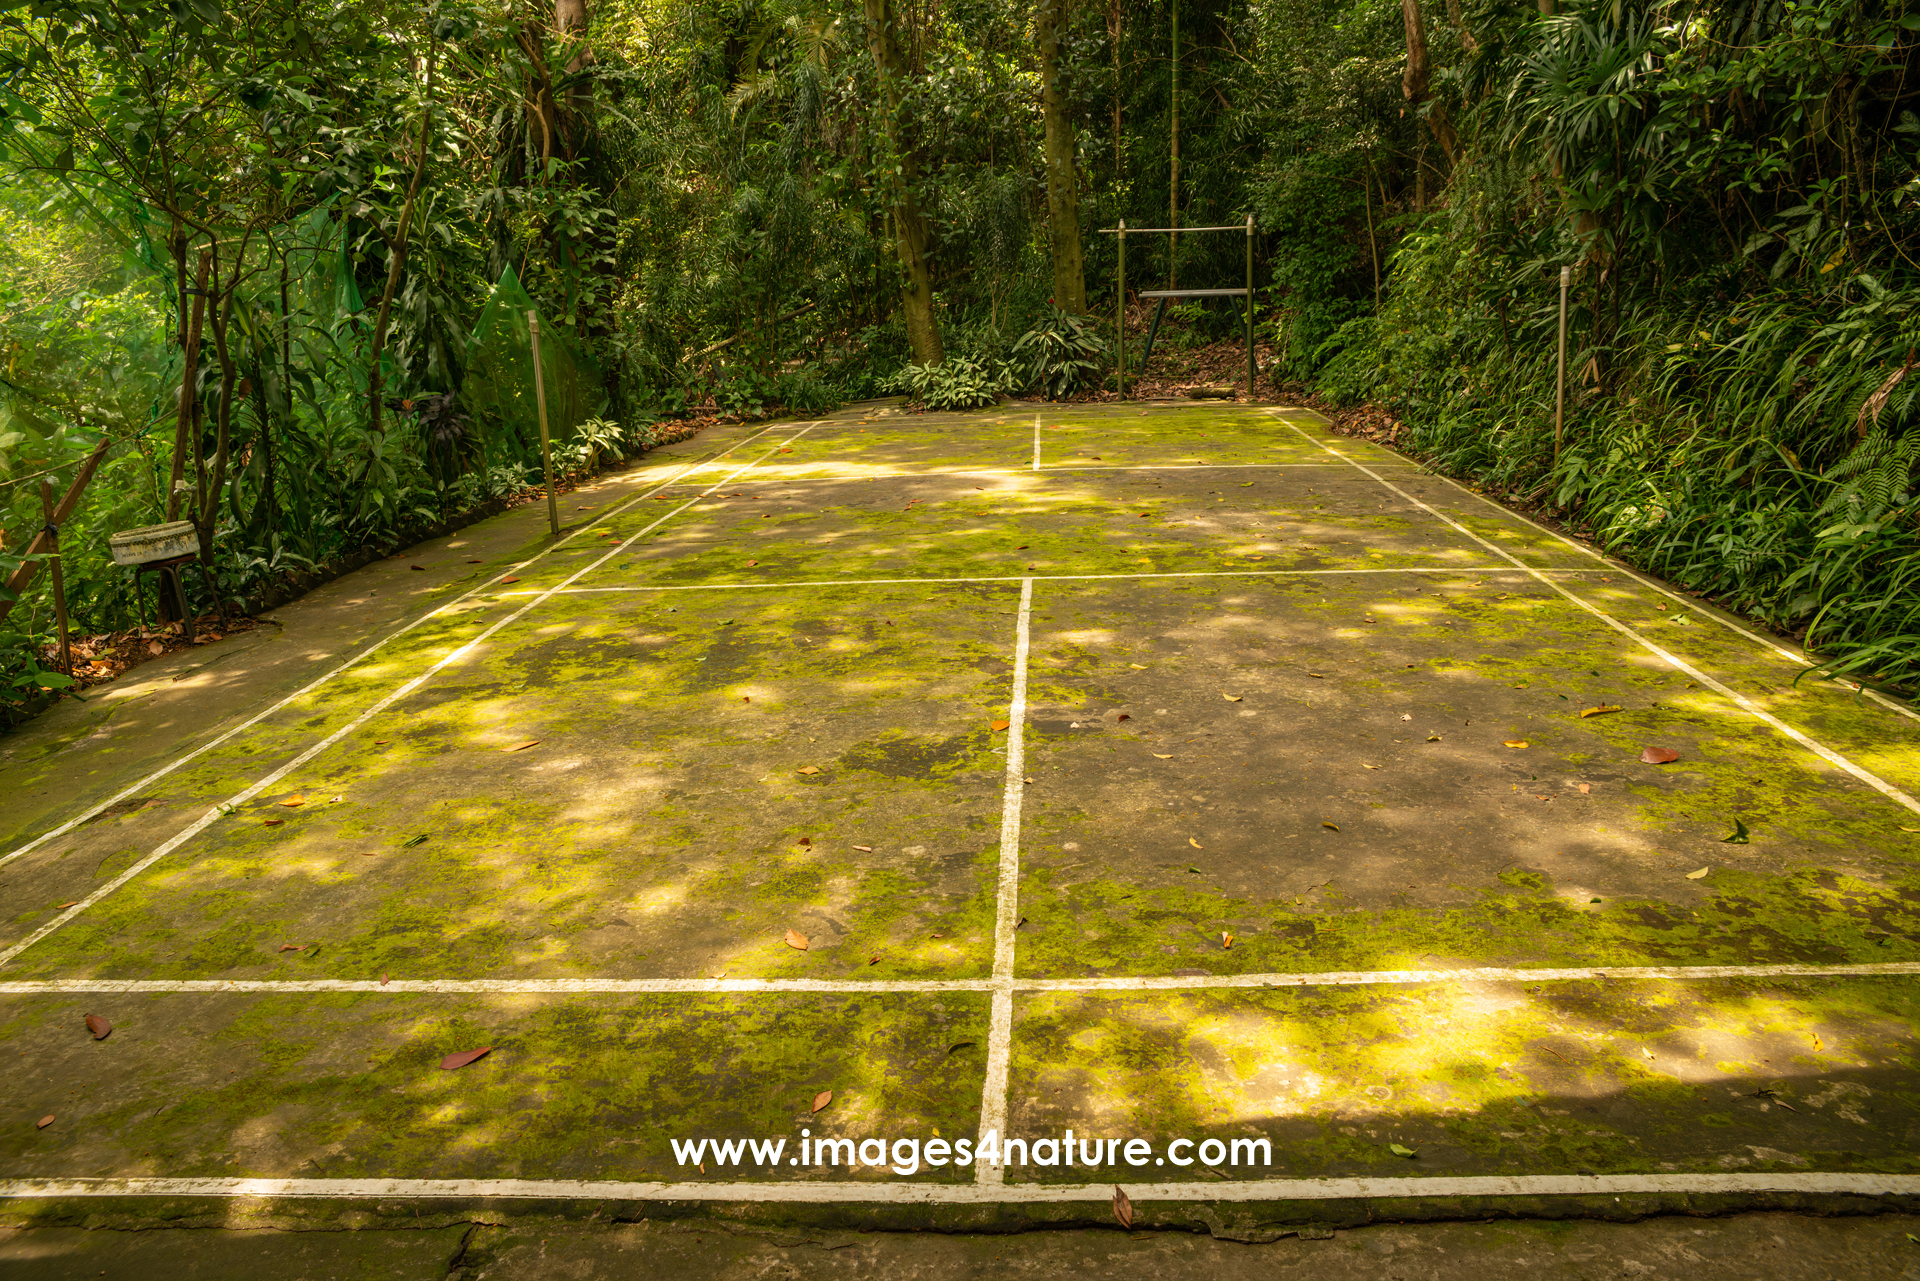 Idyllic yet empty badminton court without net, located within a lush green subtropical forest